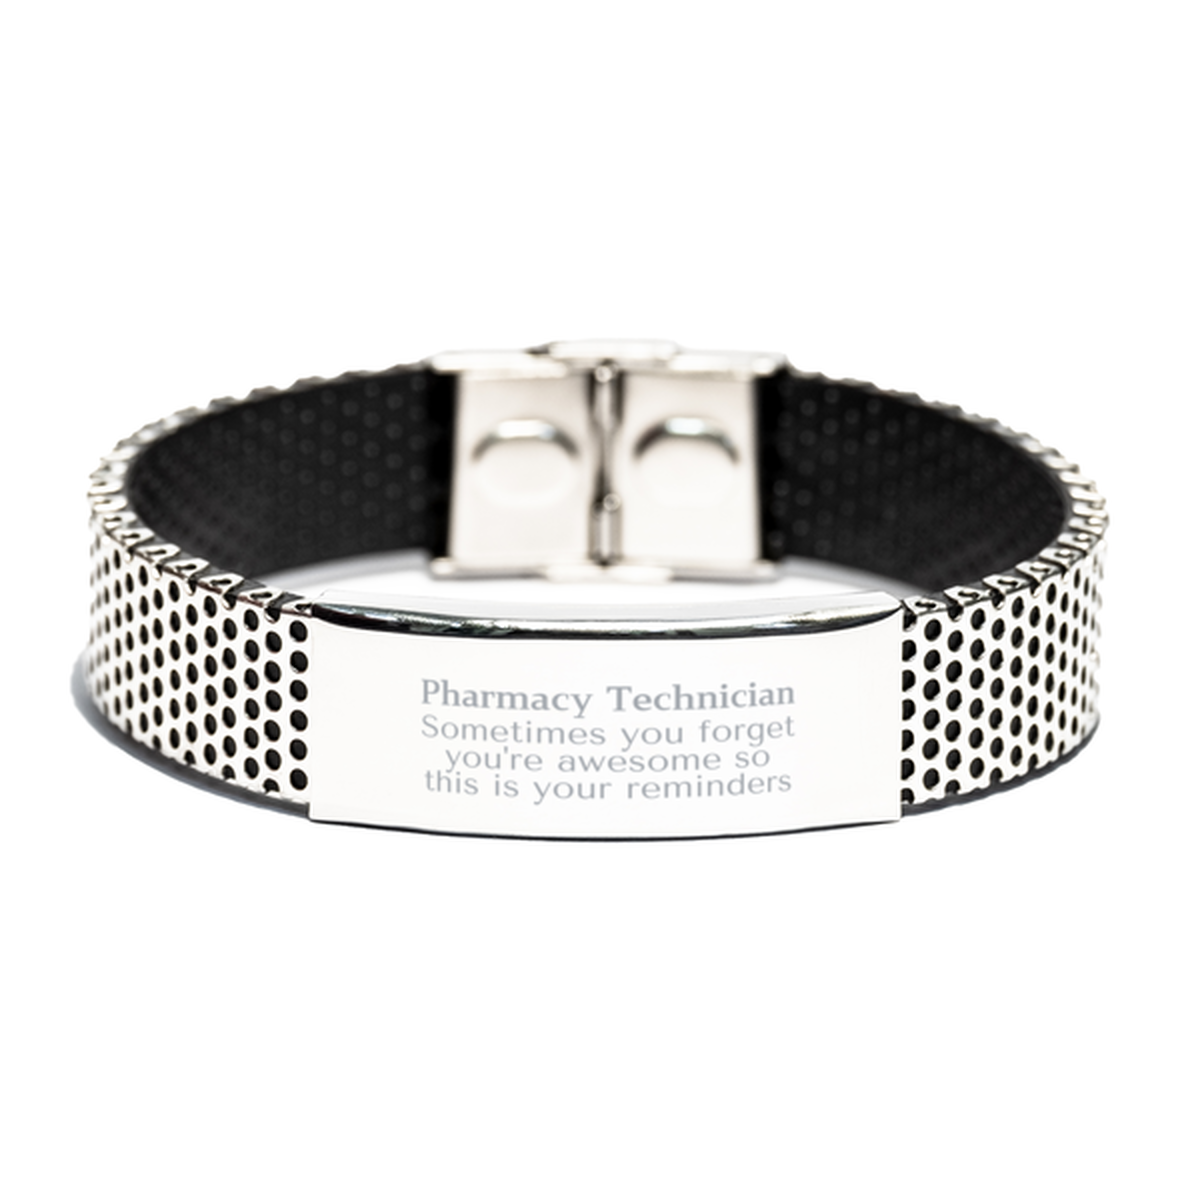 Sentimental Pharmacy Technician Stainless Steel Bracelet, Pharmacy Technician Sometimes you forget you're awesome so this is your reminders, Graduation Christmas Birthday Gifts for Pharmacy Technician, Men, Women, Coworkers